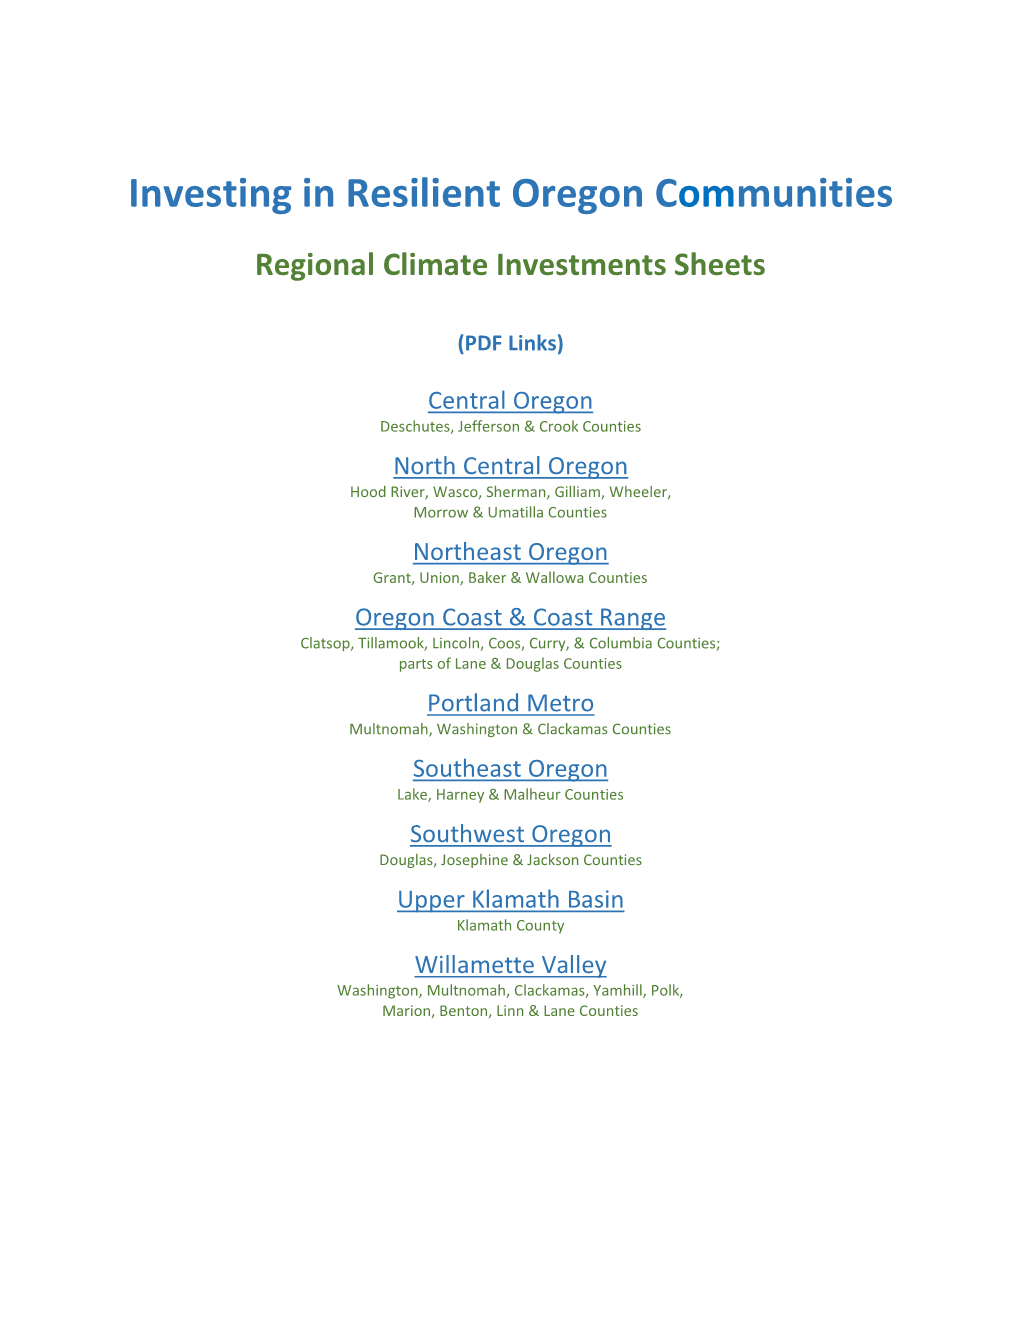 Investing in Resilient Oregon Communities Regional Climate